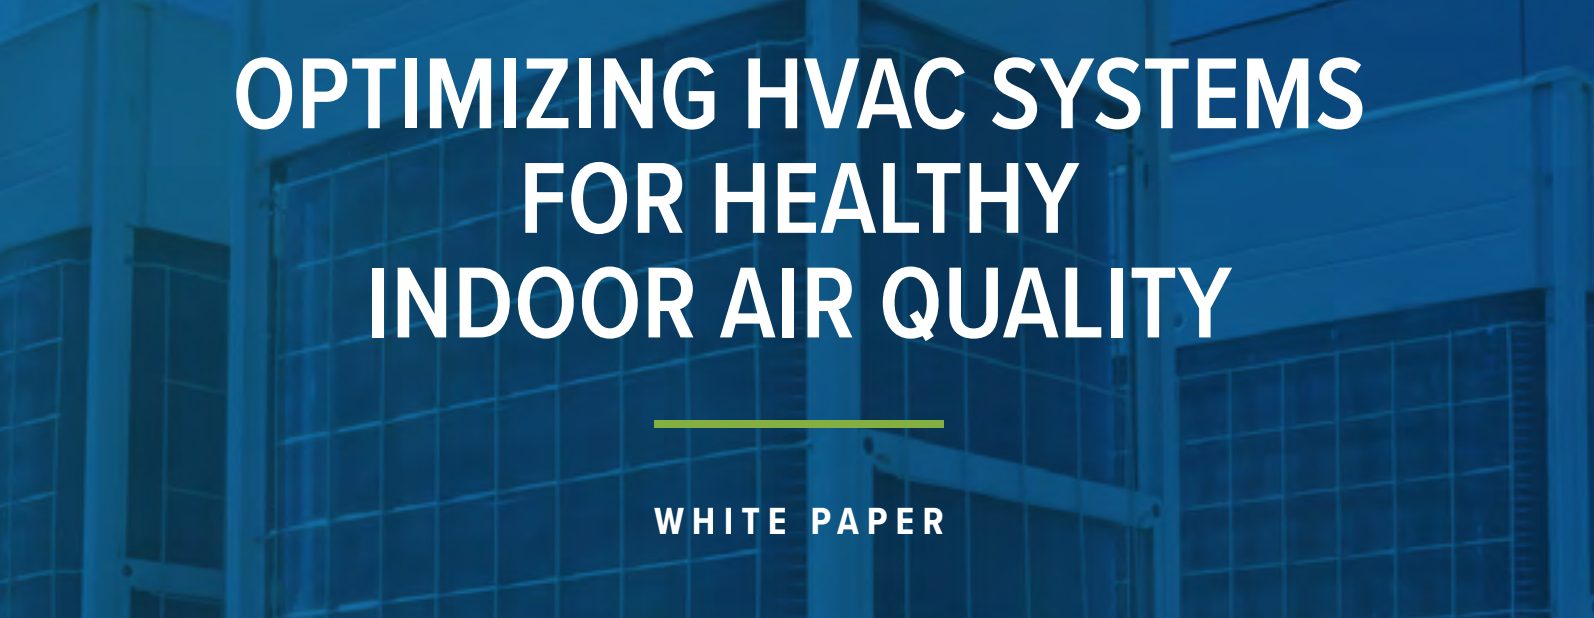 Optimizing HVAC systems for healthy indoor air quality